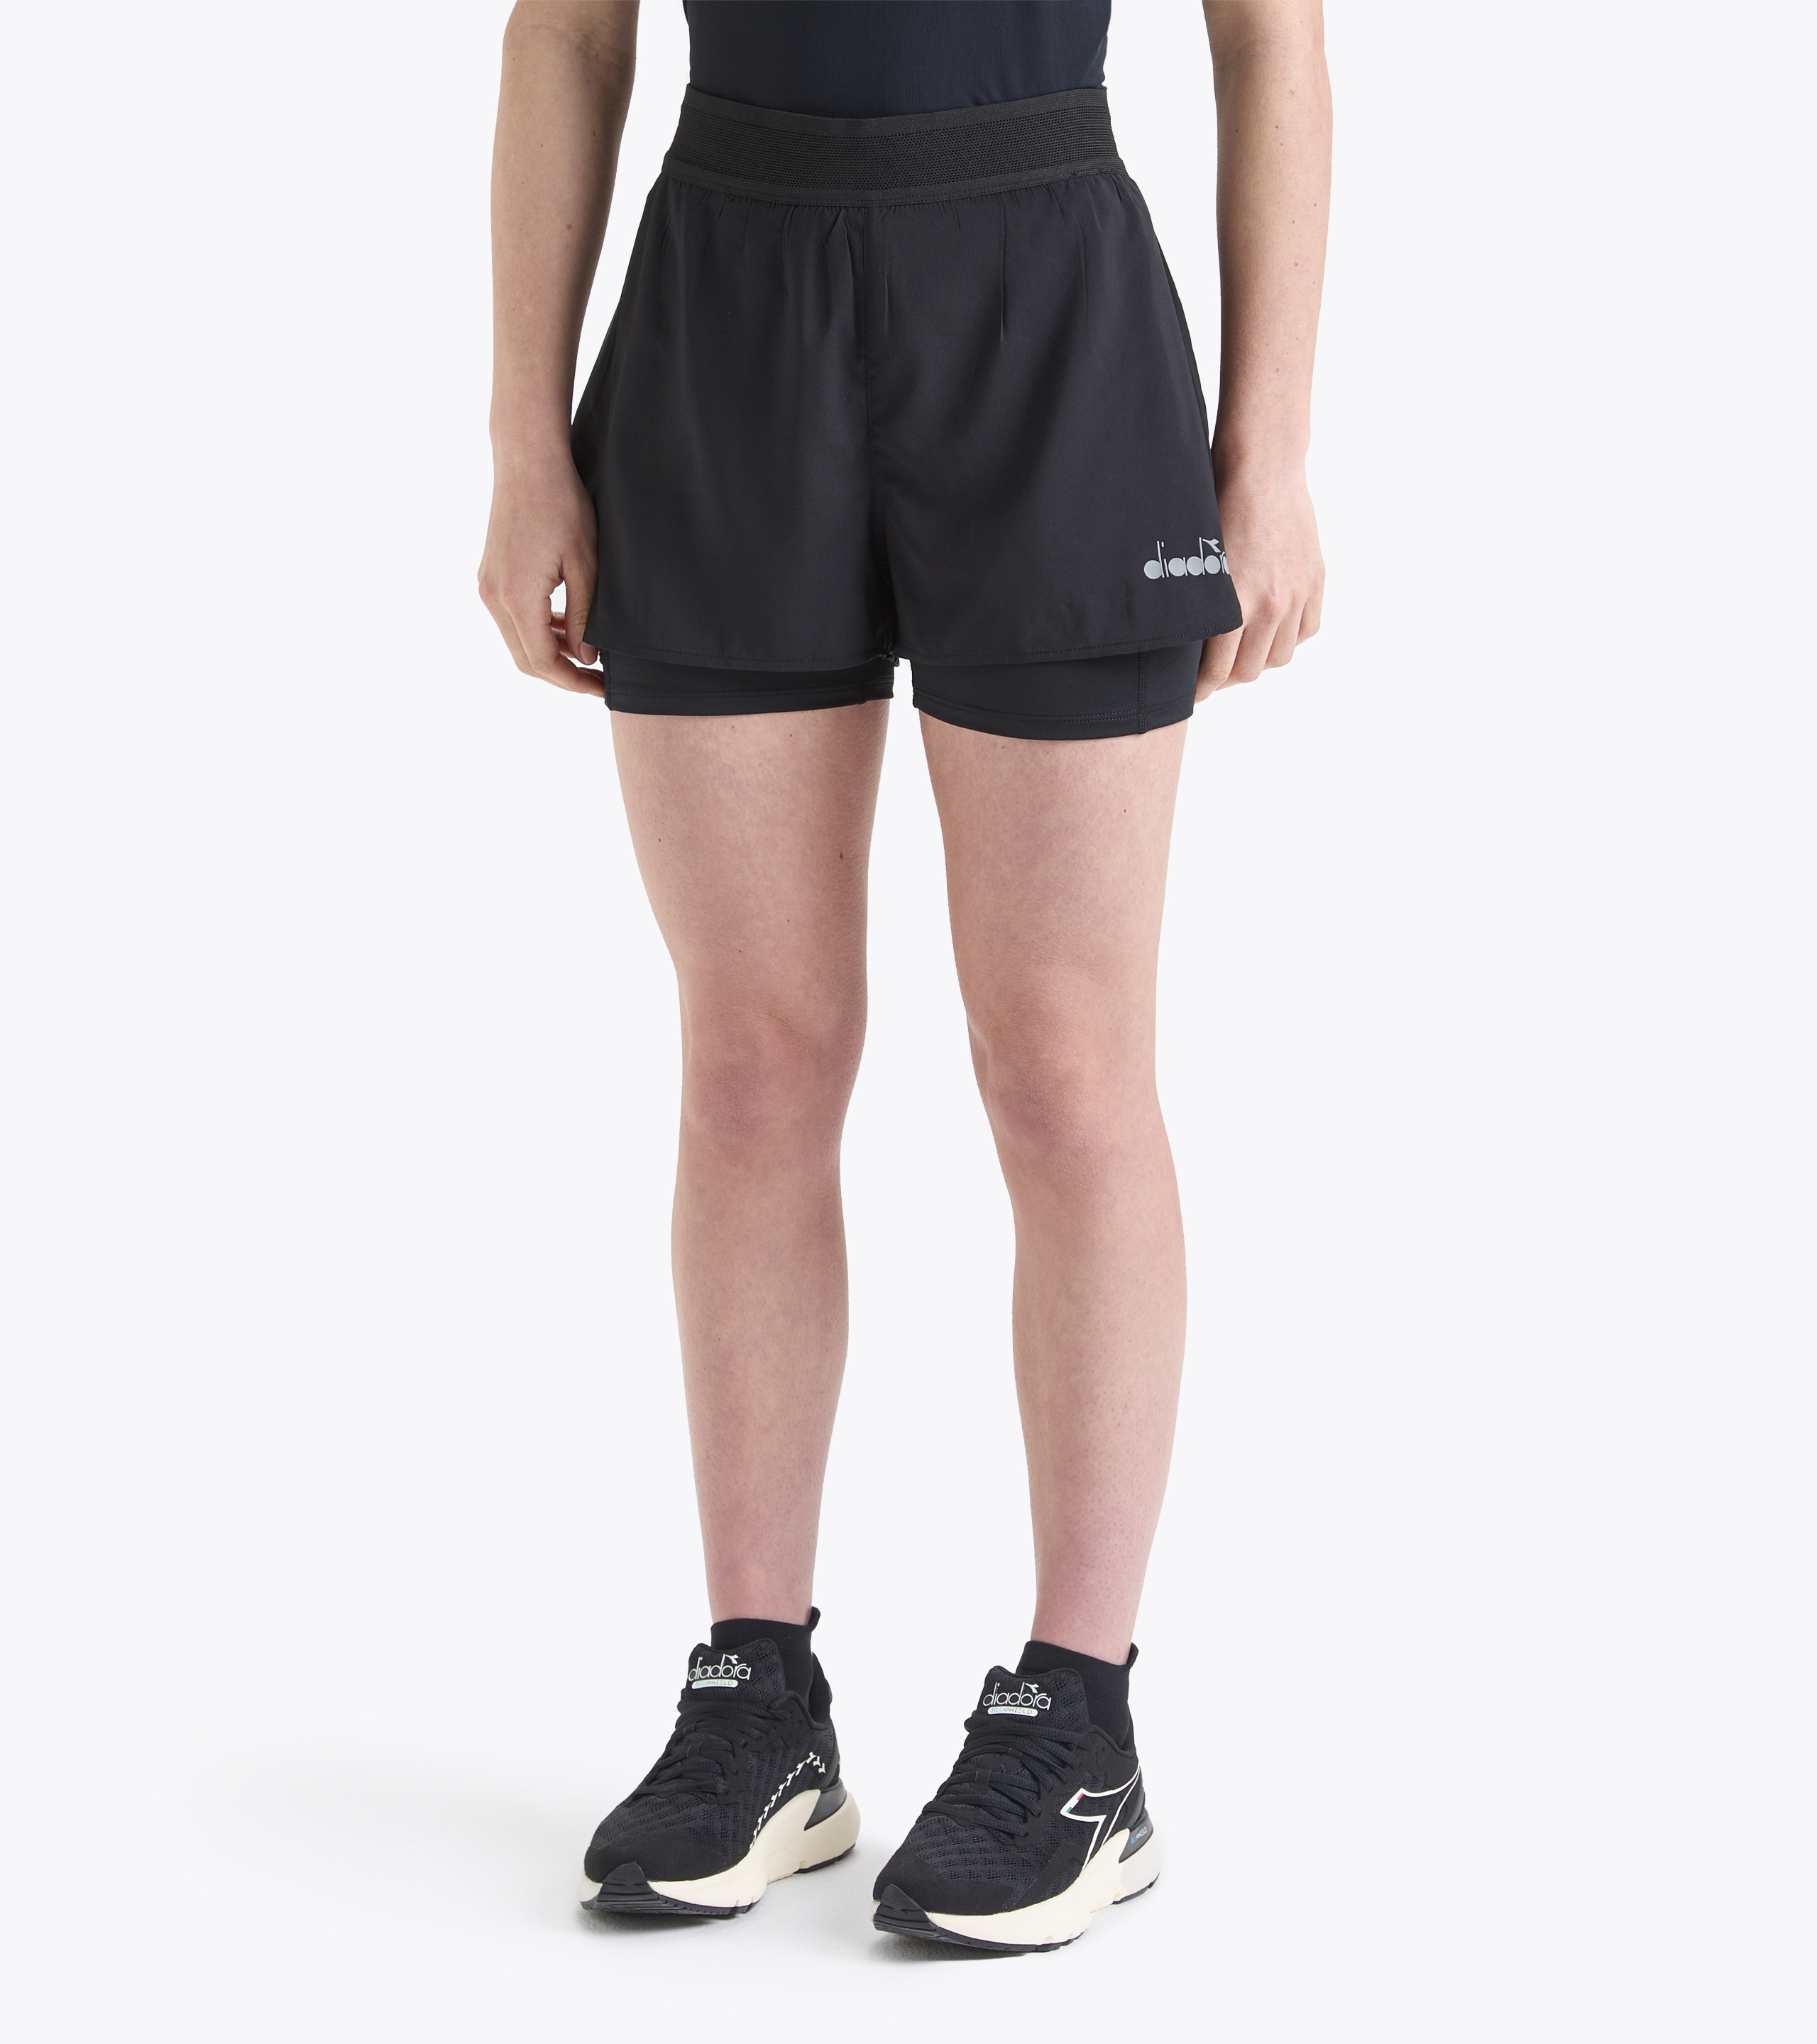 Level up your comfort quotient with double layered shorts for